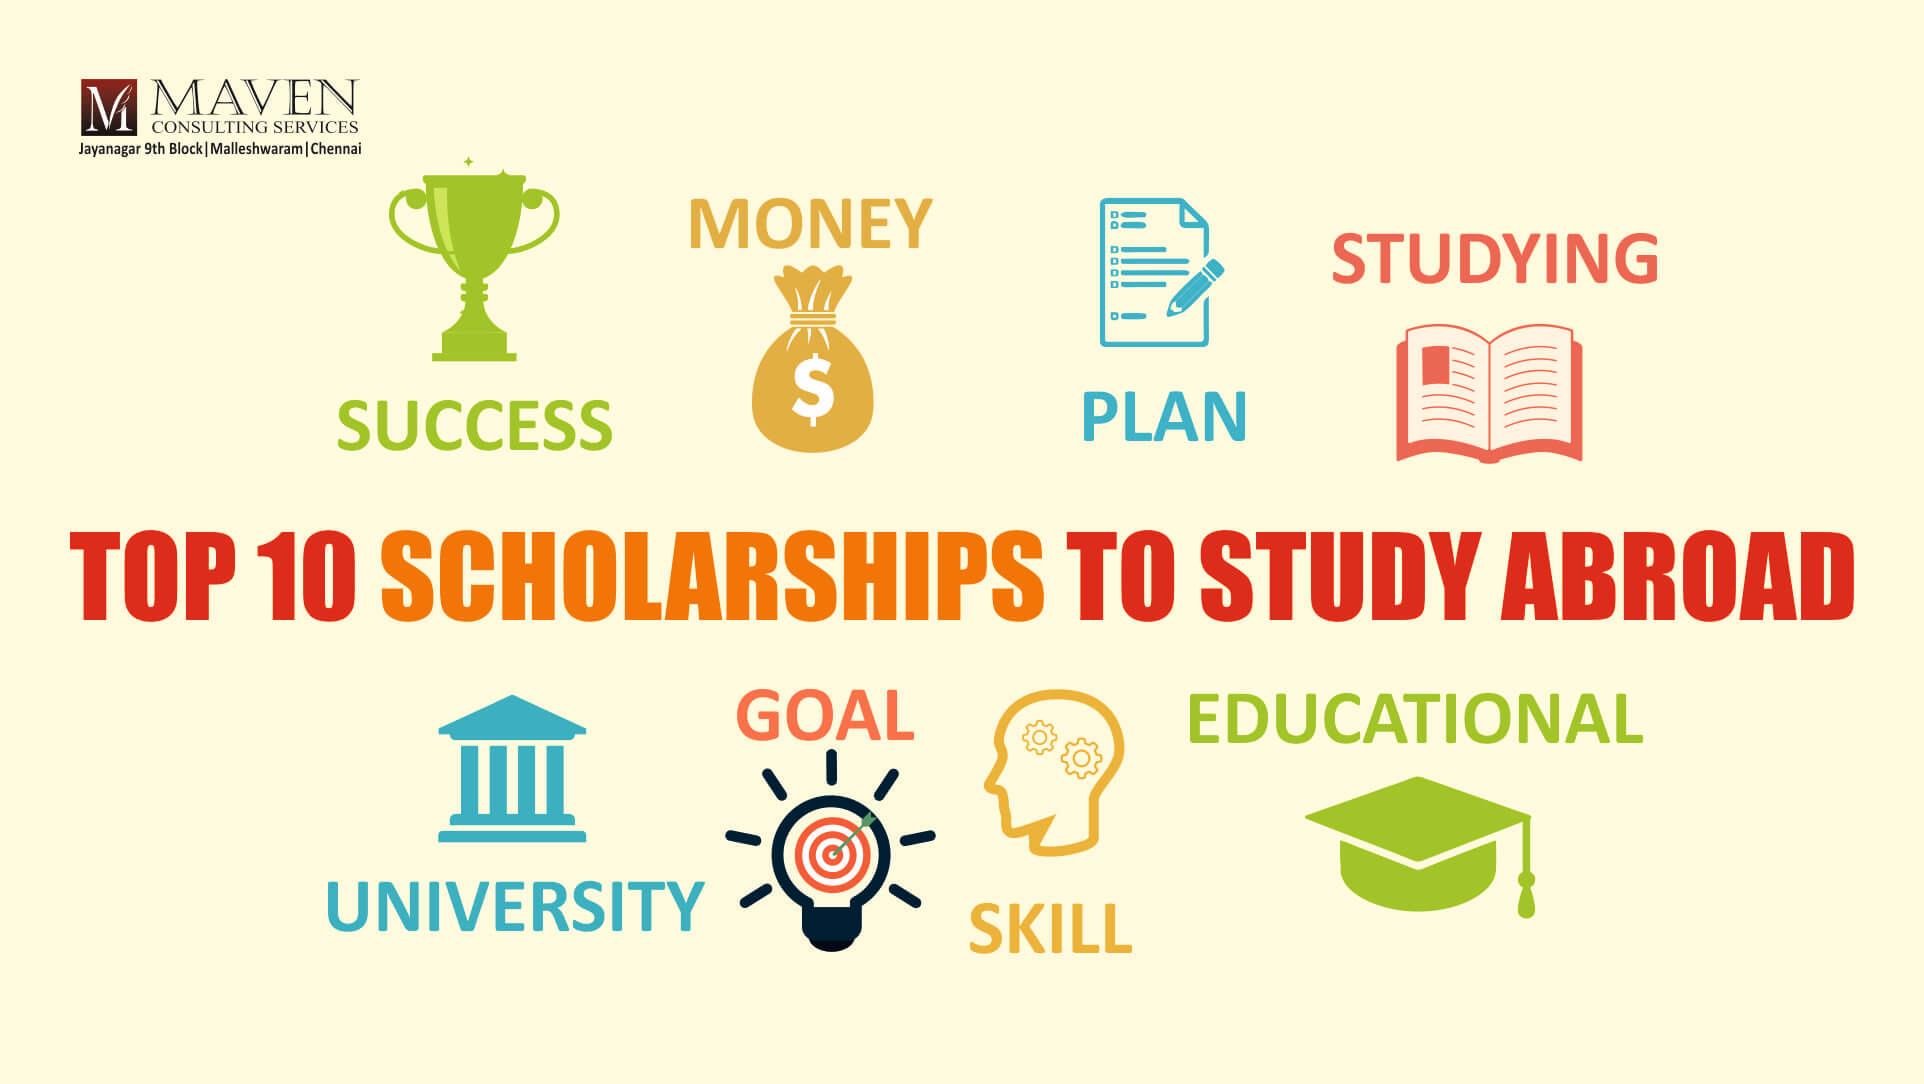 TOP 10 SCHOLARSHIPS To Study Abroad 21-11-2020 B (1)